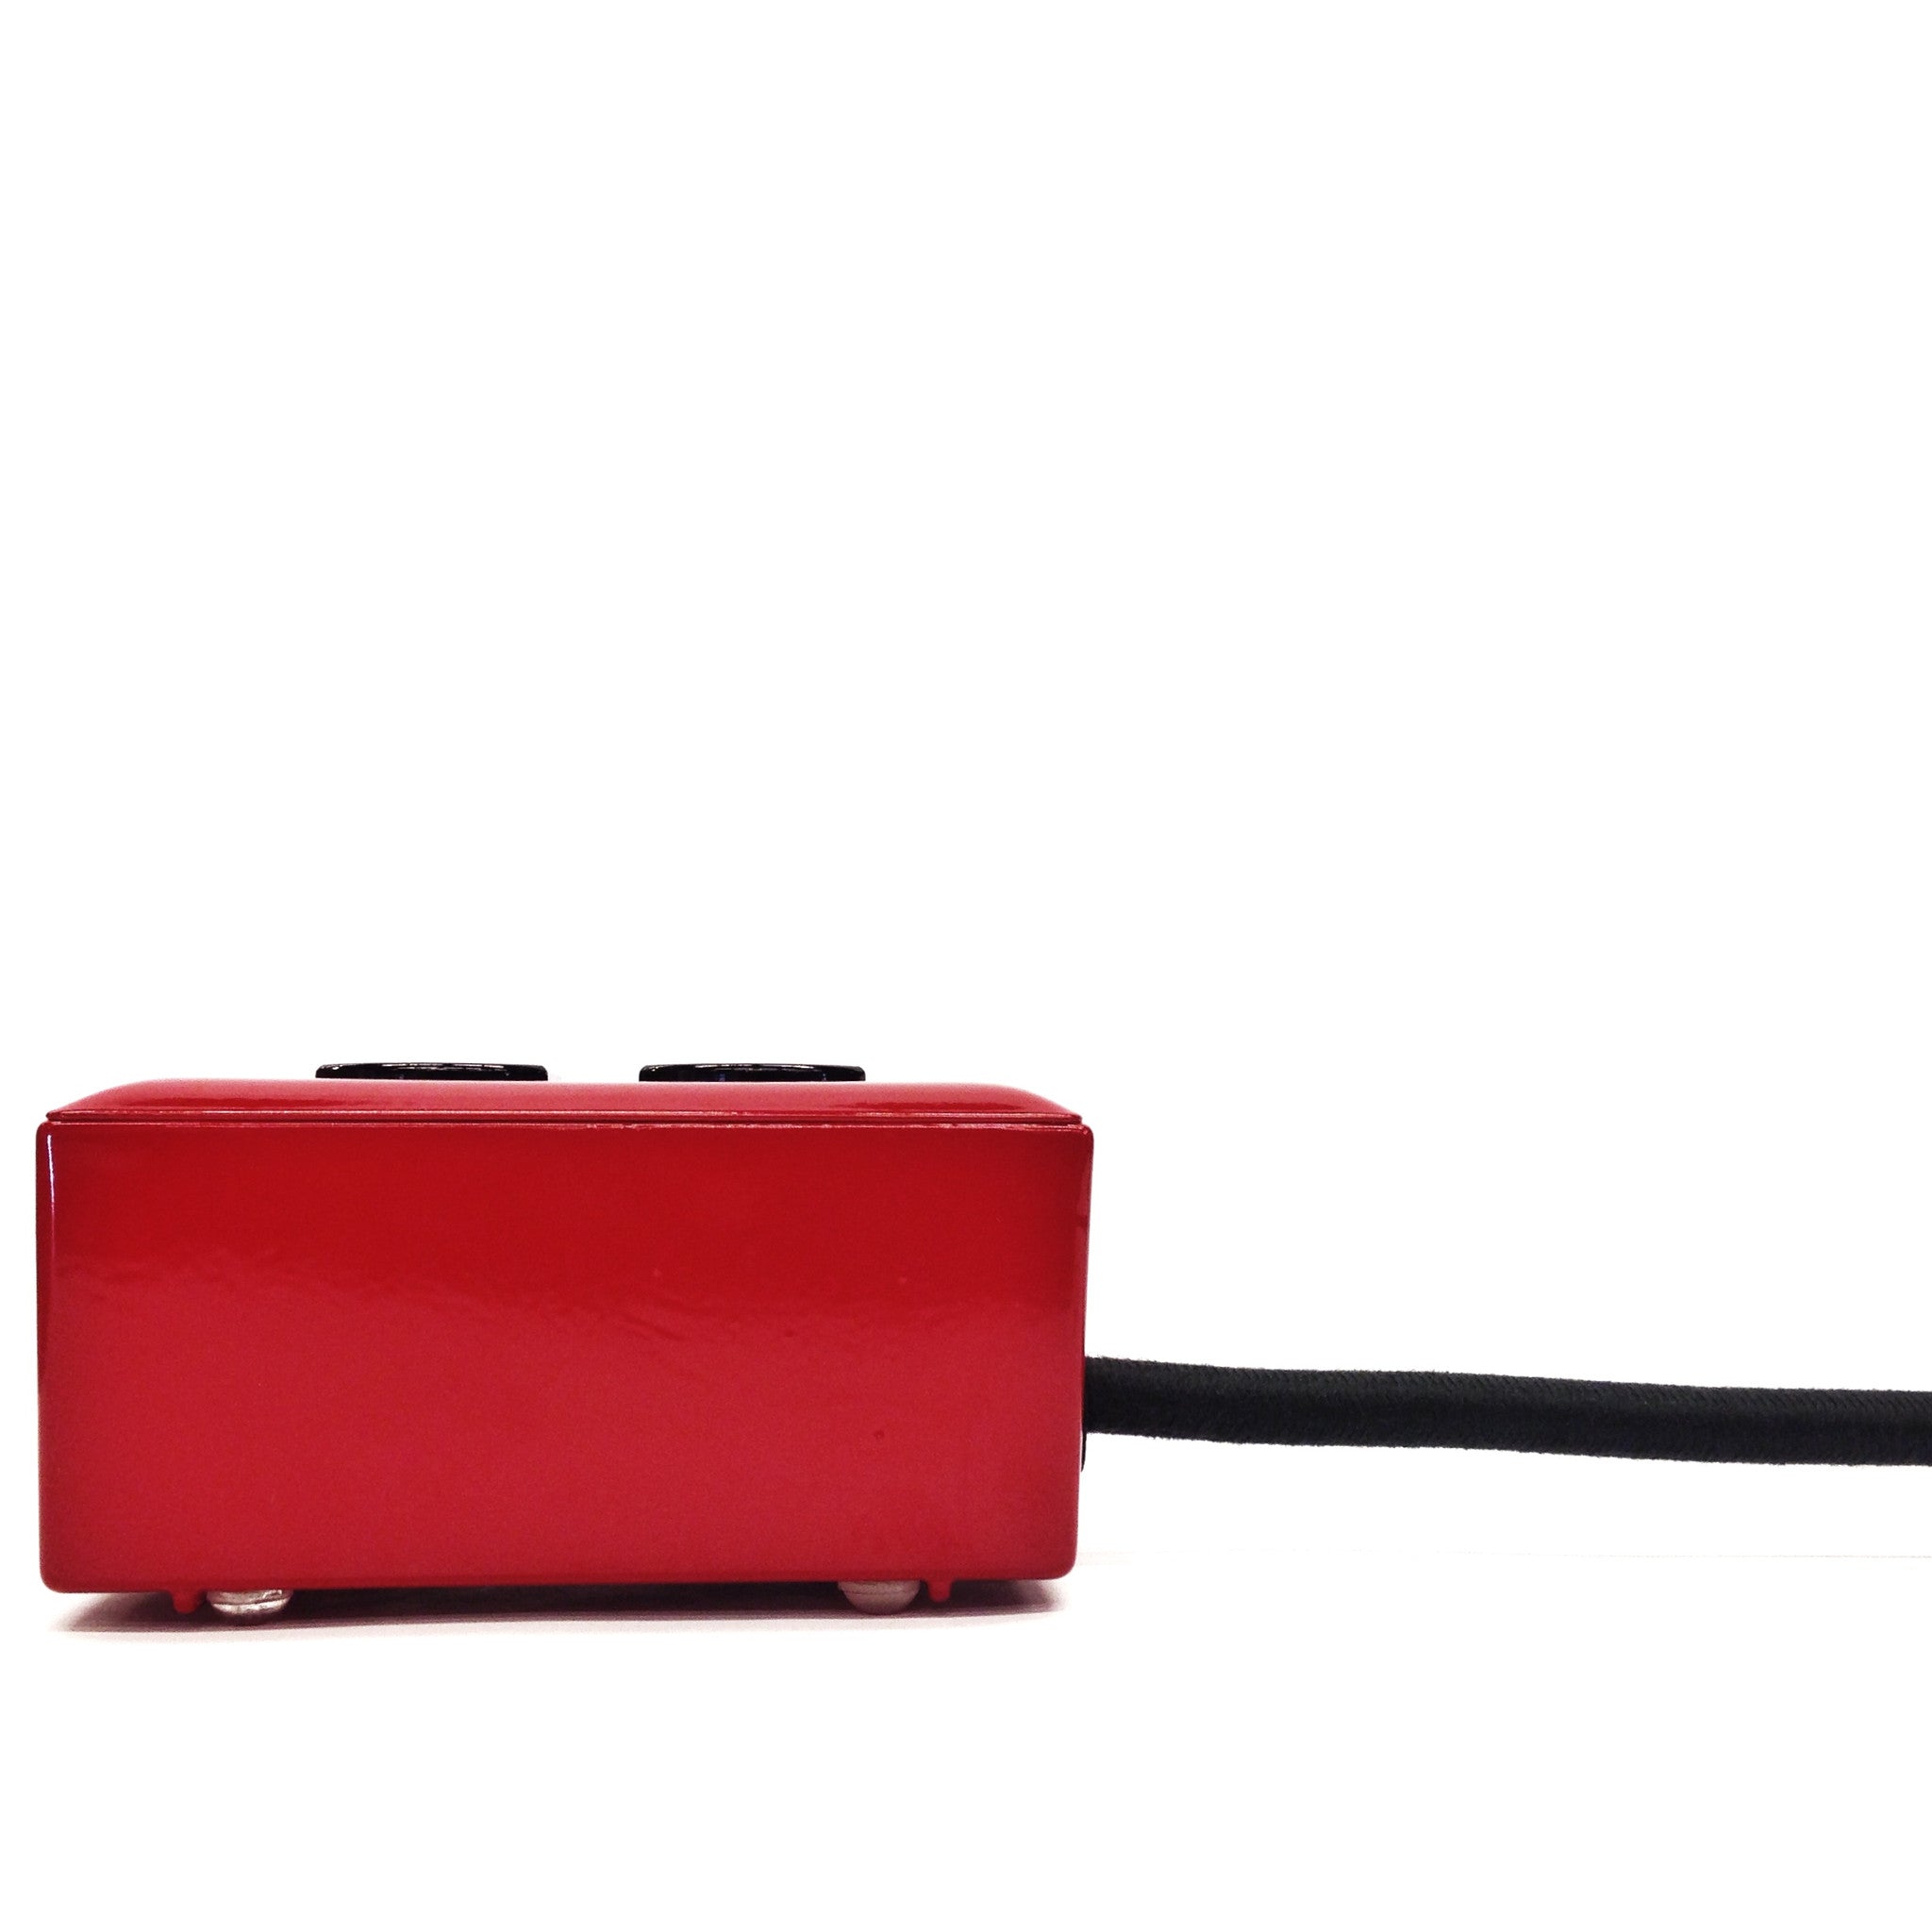 Extō Charcoal Red - A Modern Dual-Tamper-Resistant Outlet, 15-AMP Extension Cord